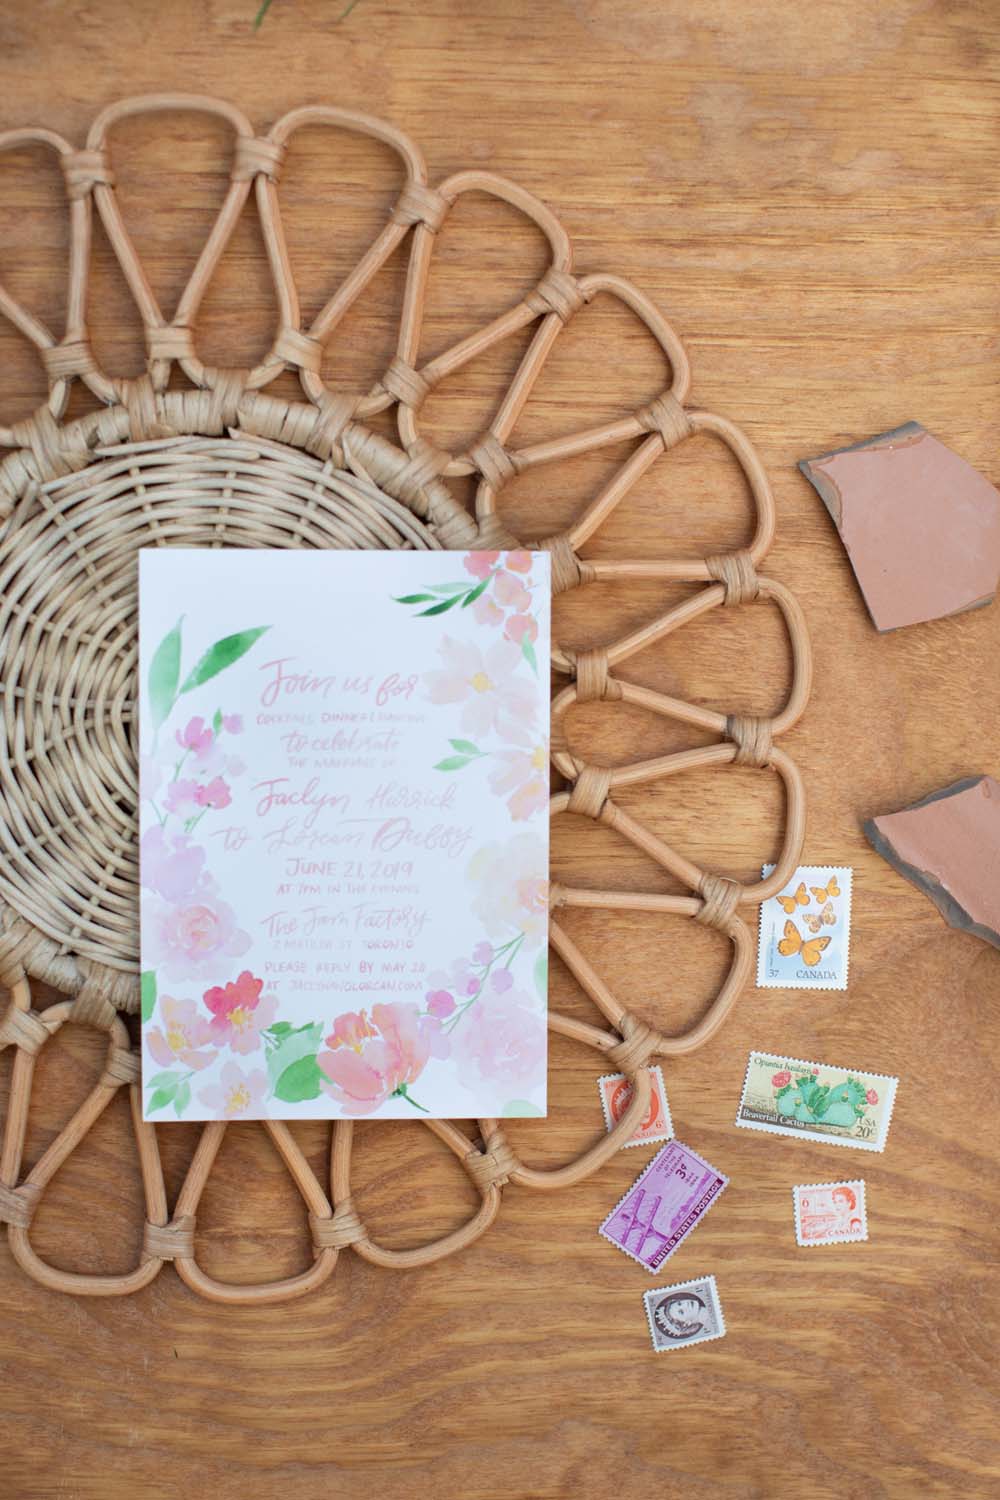 A Fun, Summer Themed Wedding with a Touch of Spanish Flare in Toronto